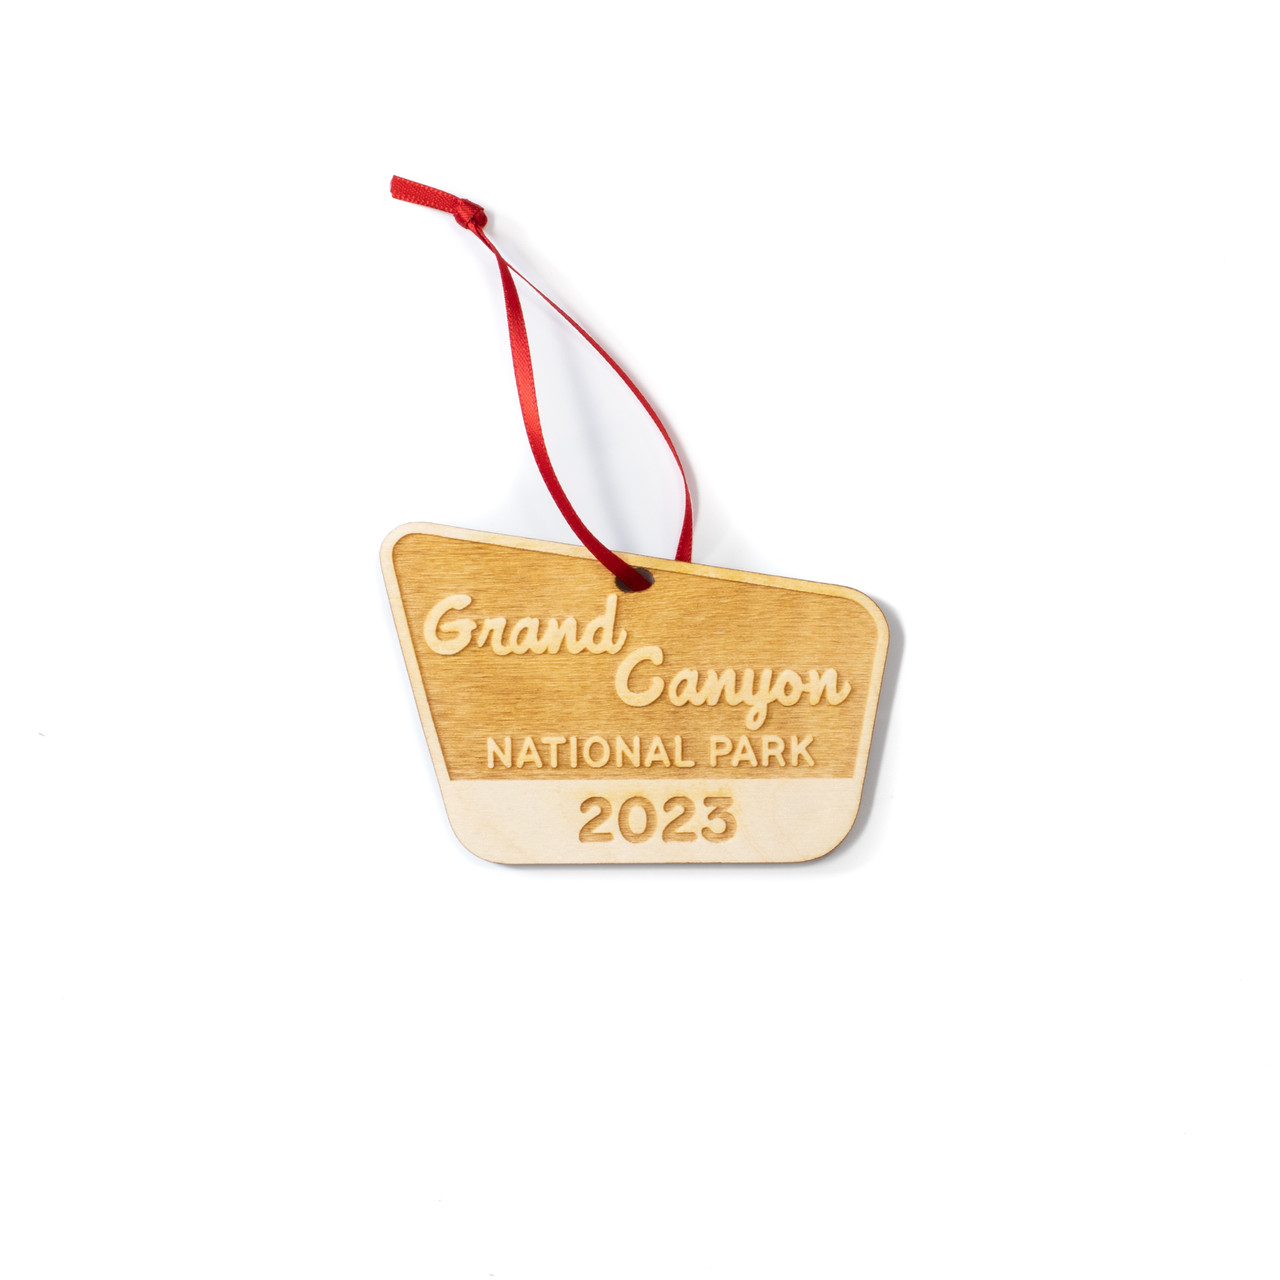 A charming engraved wooden ornament of Grand Canyon National Park: A perfect souvenir to remember the stunning landscapes and natural beauty of the park.